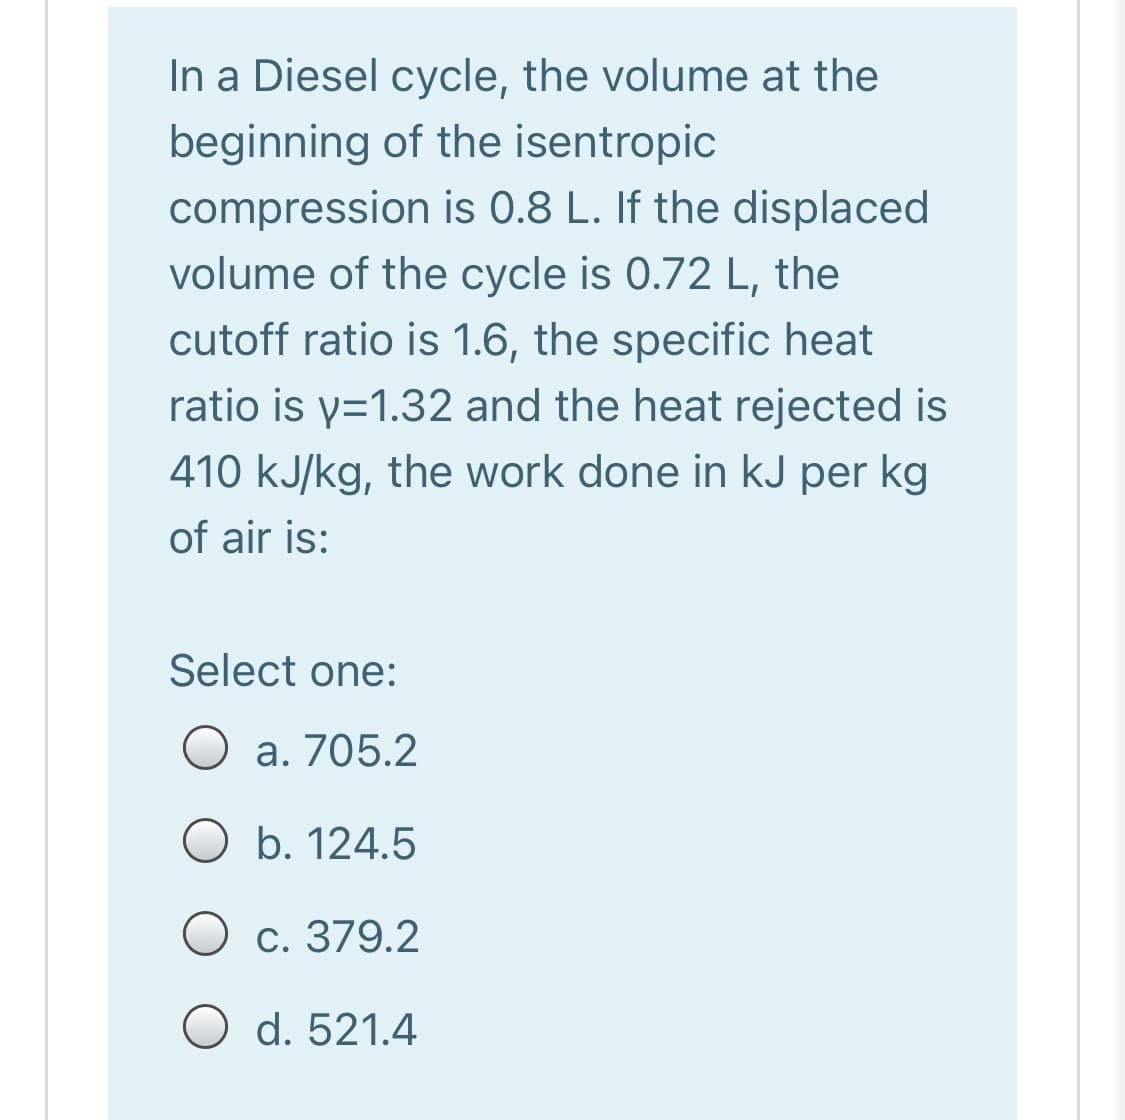 In a Diesel cycle, the volume at the
beginning of the isentropic
compression is 0.8 L. If the displaced
volume of the cycle is 0.72 L,
the
cutoff ratio is 1.6, the specific heat
ratio is y=1.32 and the heat rejected is
410 kJ/kg, the work done in kJ per kg
of air is:
Select one:
a. 705.2
O b. 124.5
O c. 379.2
O d. 521.4
